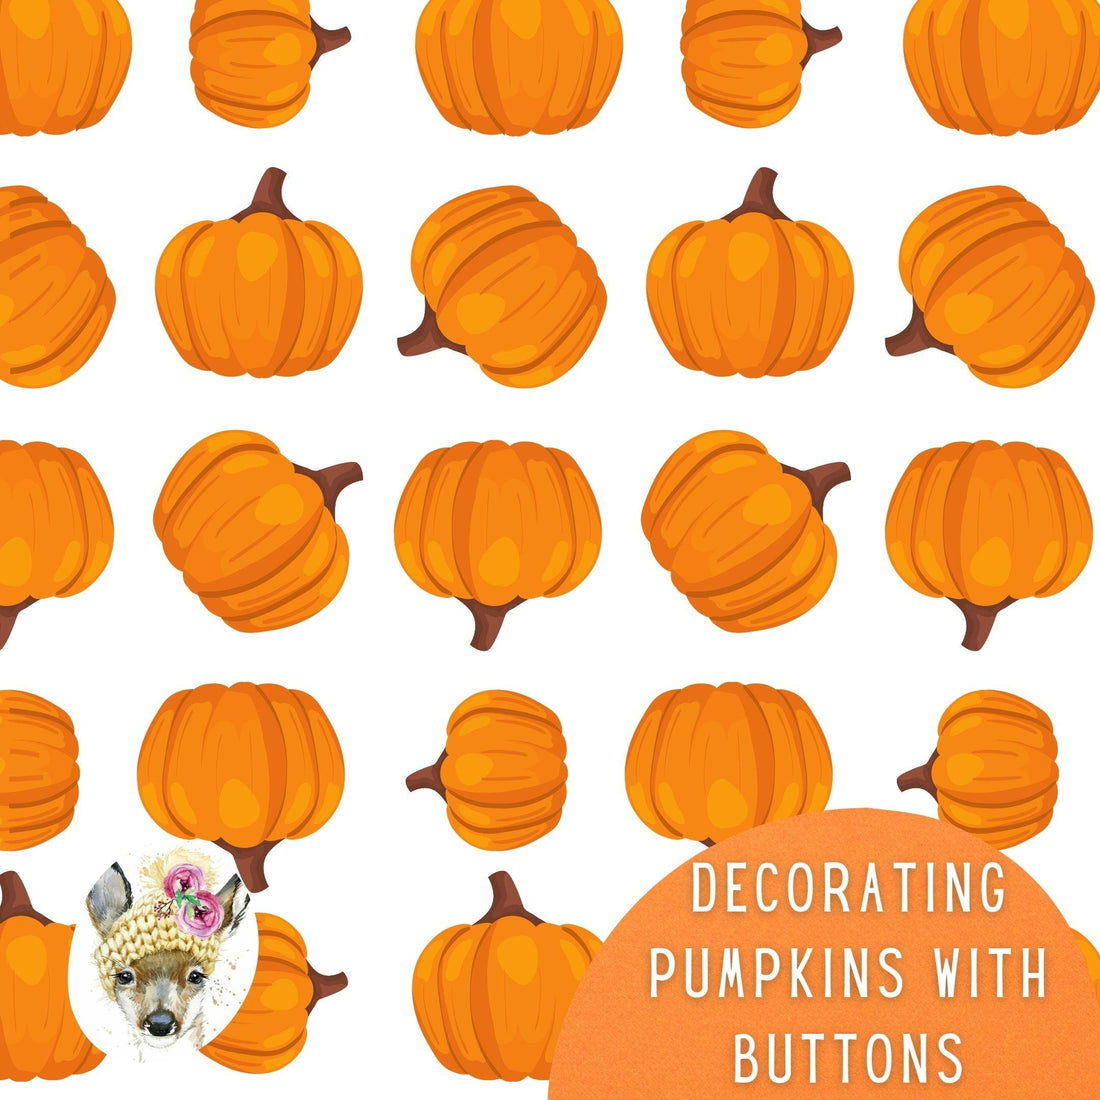 Decorating Pumpkins with Buttons